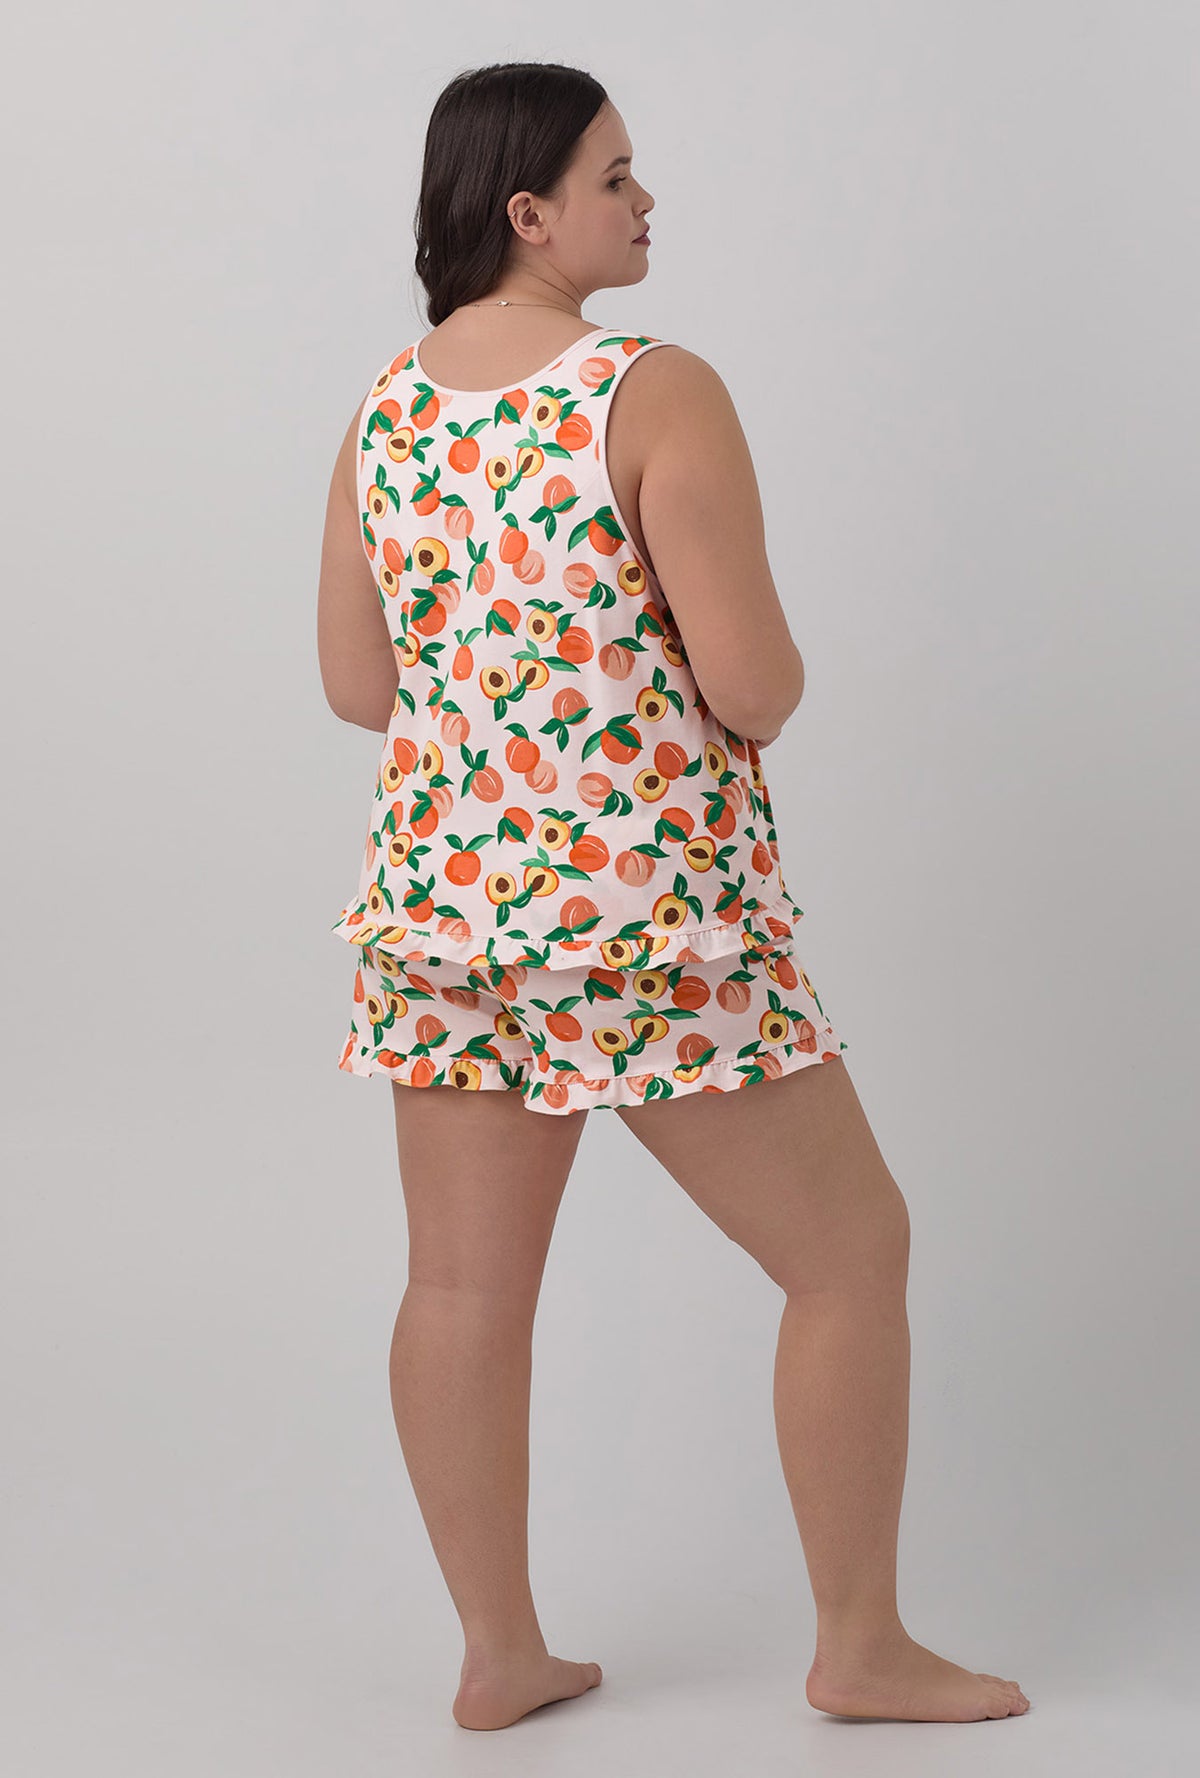 A lady wearing Ruffle Tank Shorty Stretch Jersey PJ Set with peachy keen print